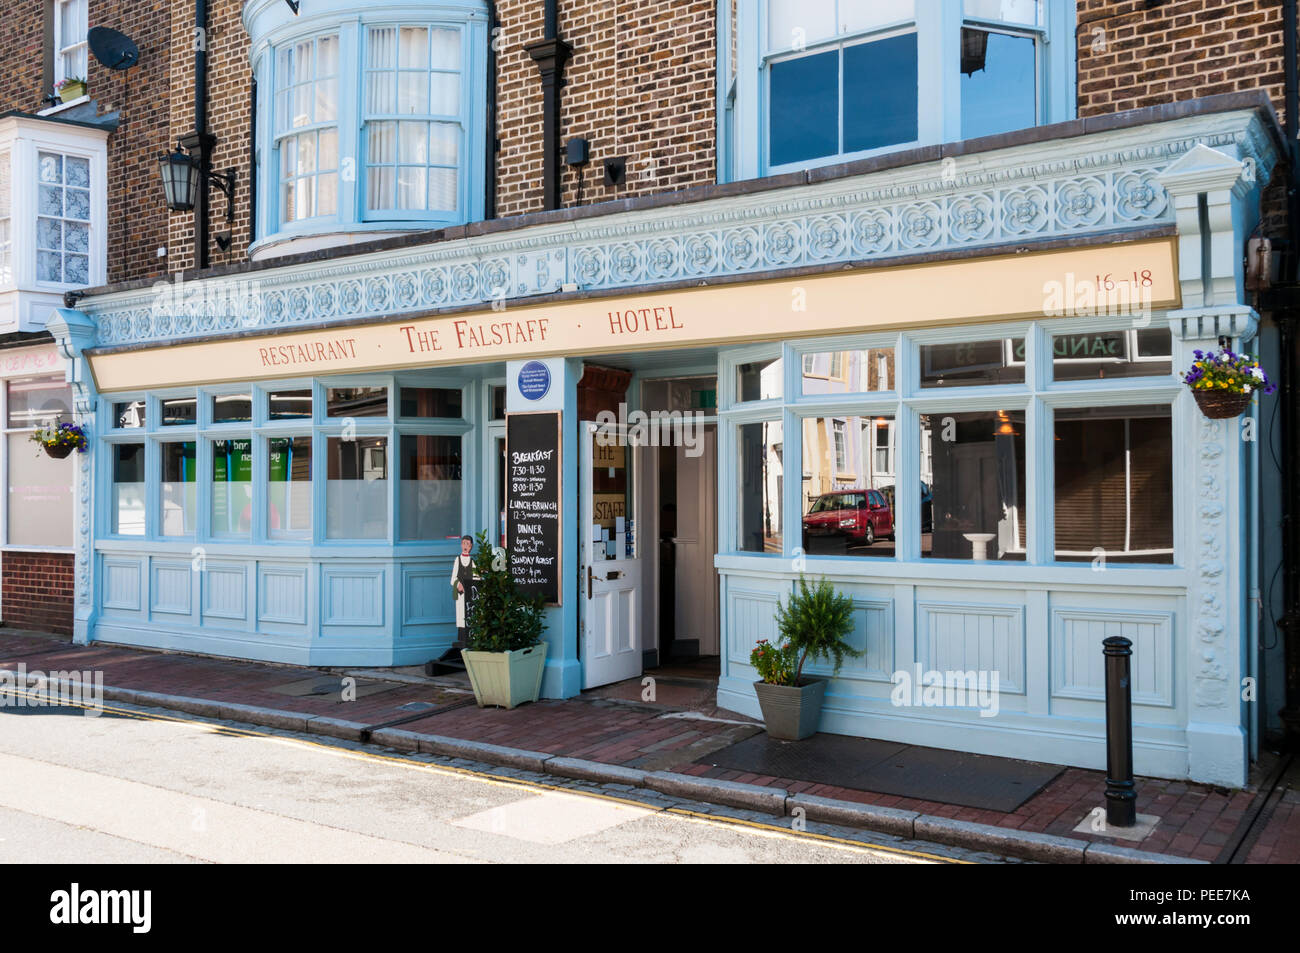 The Falstaff Hotel and restaurant in Ramsgate, Kent.. Stock Photo